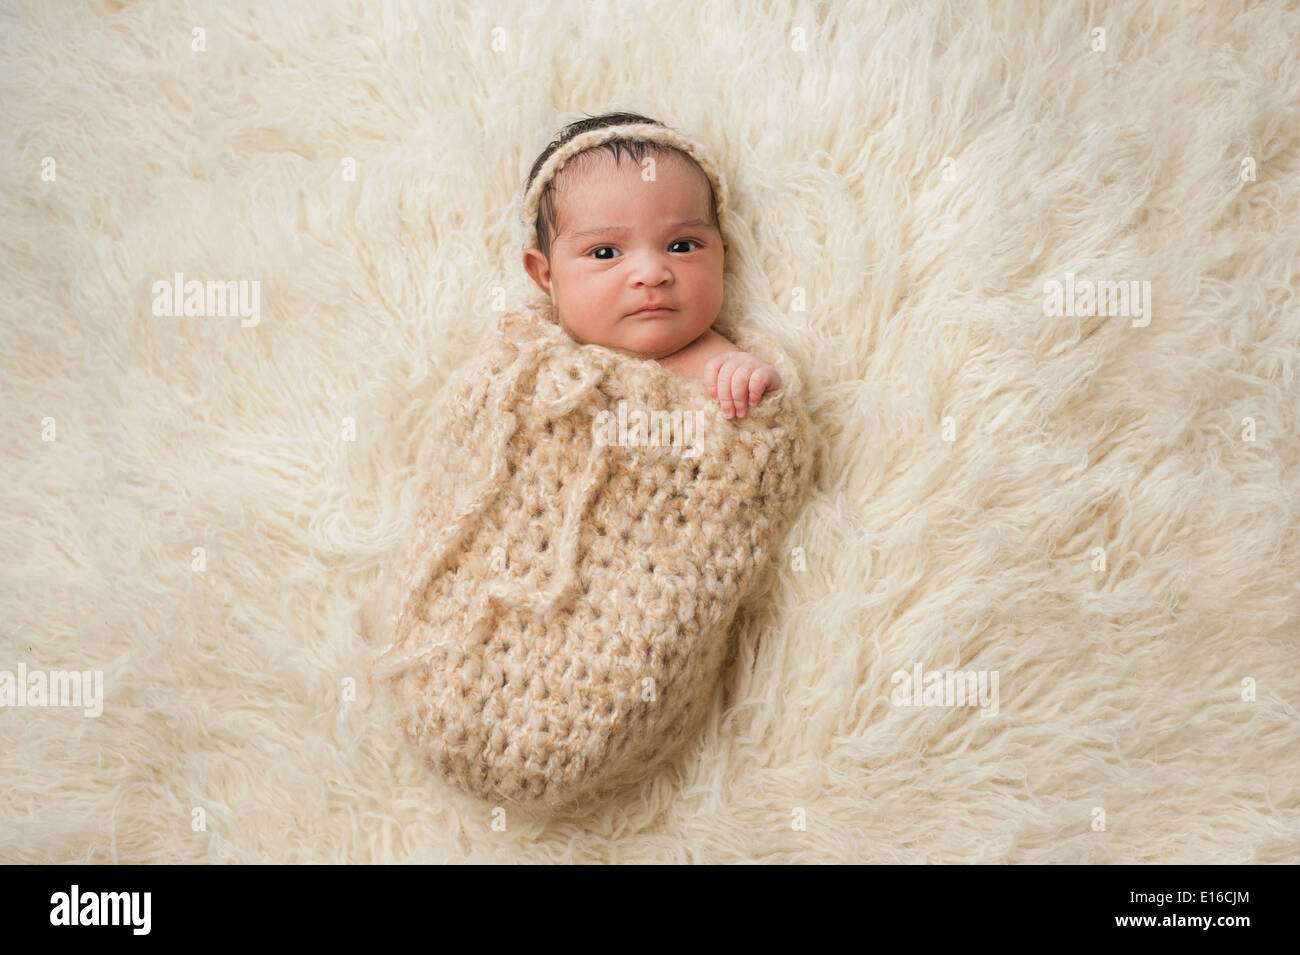 Baby girl with a displeased look on her face. Stock Photo